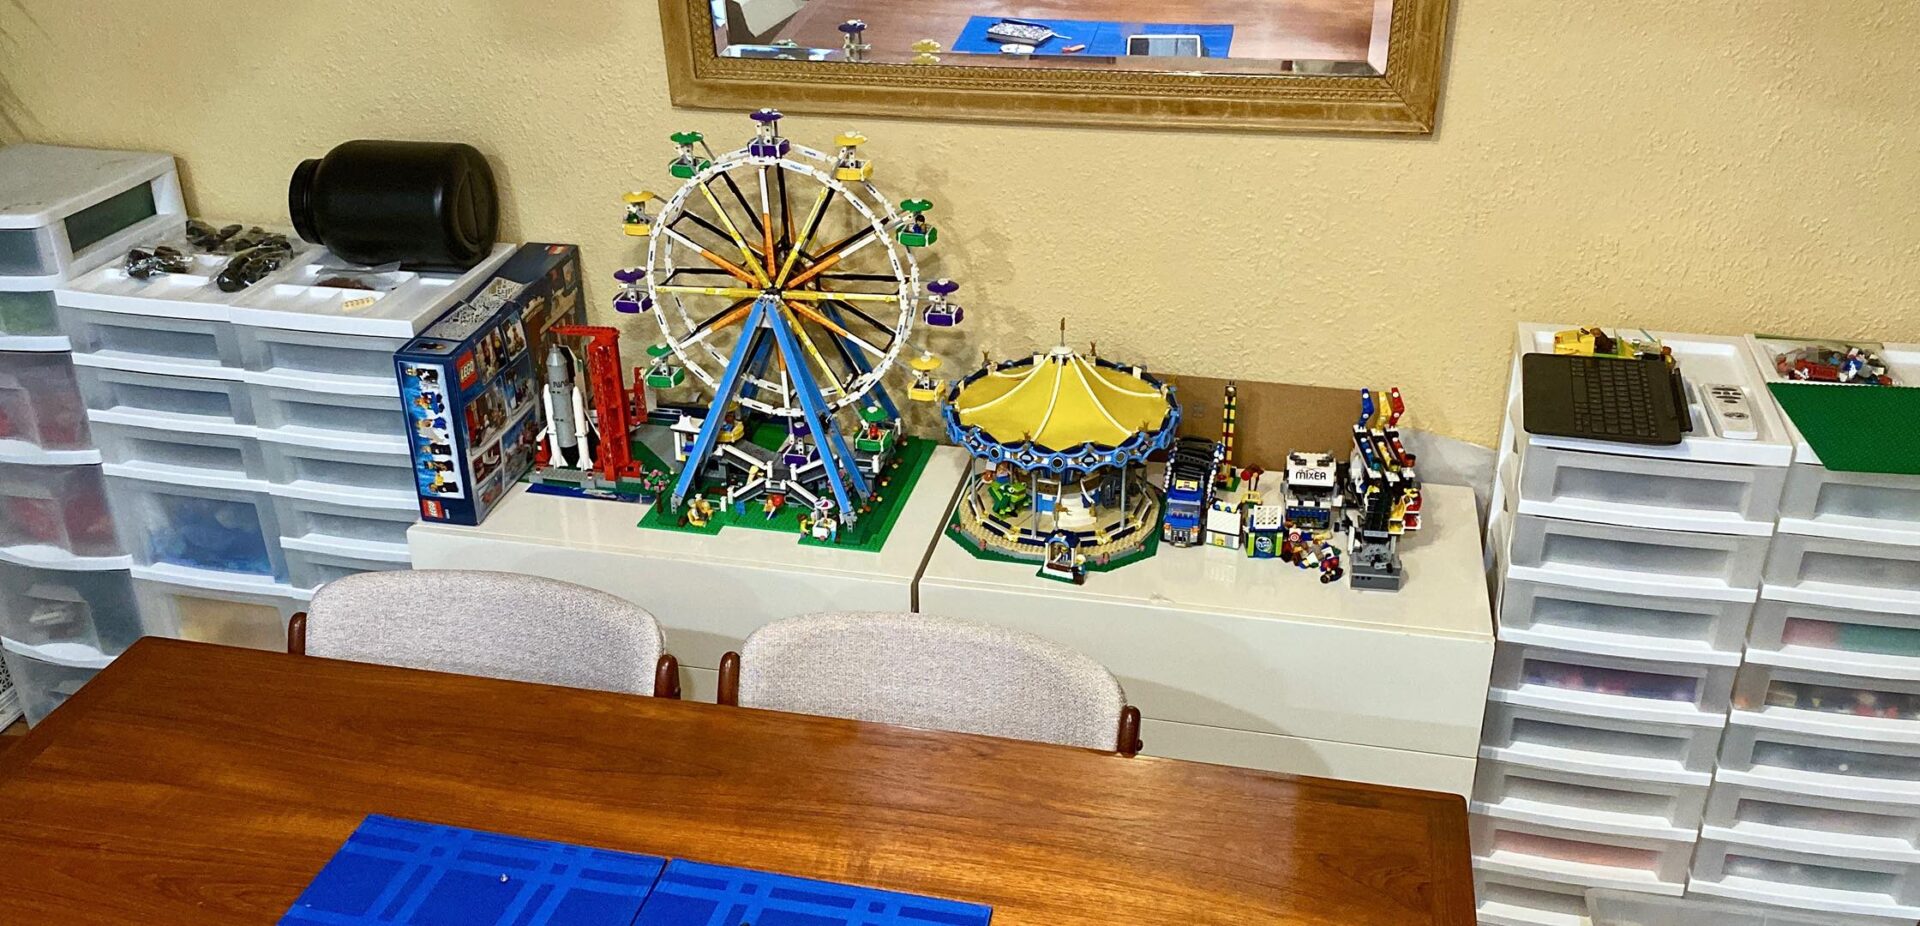 Our little brick sorting drawers and collection coming together. Plus some spring-friendly amusement park sets we had out!